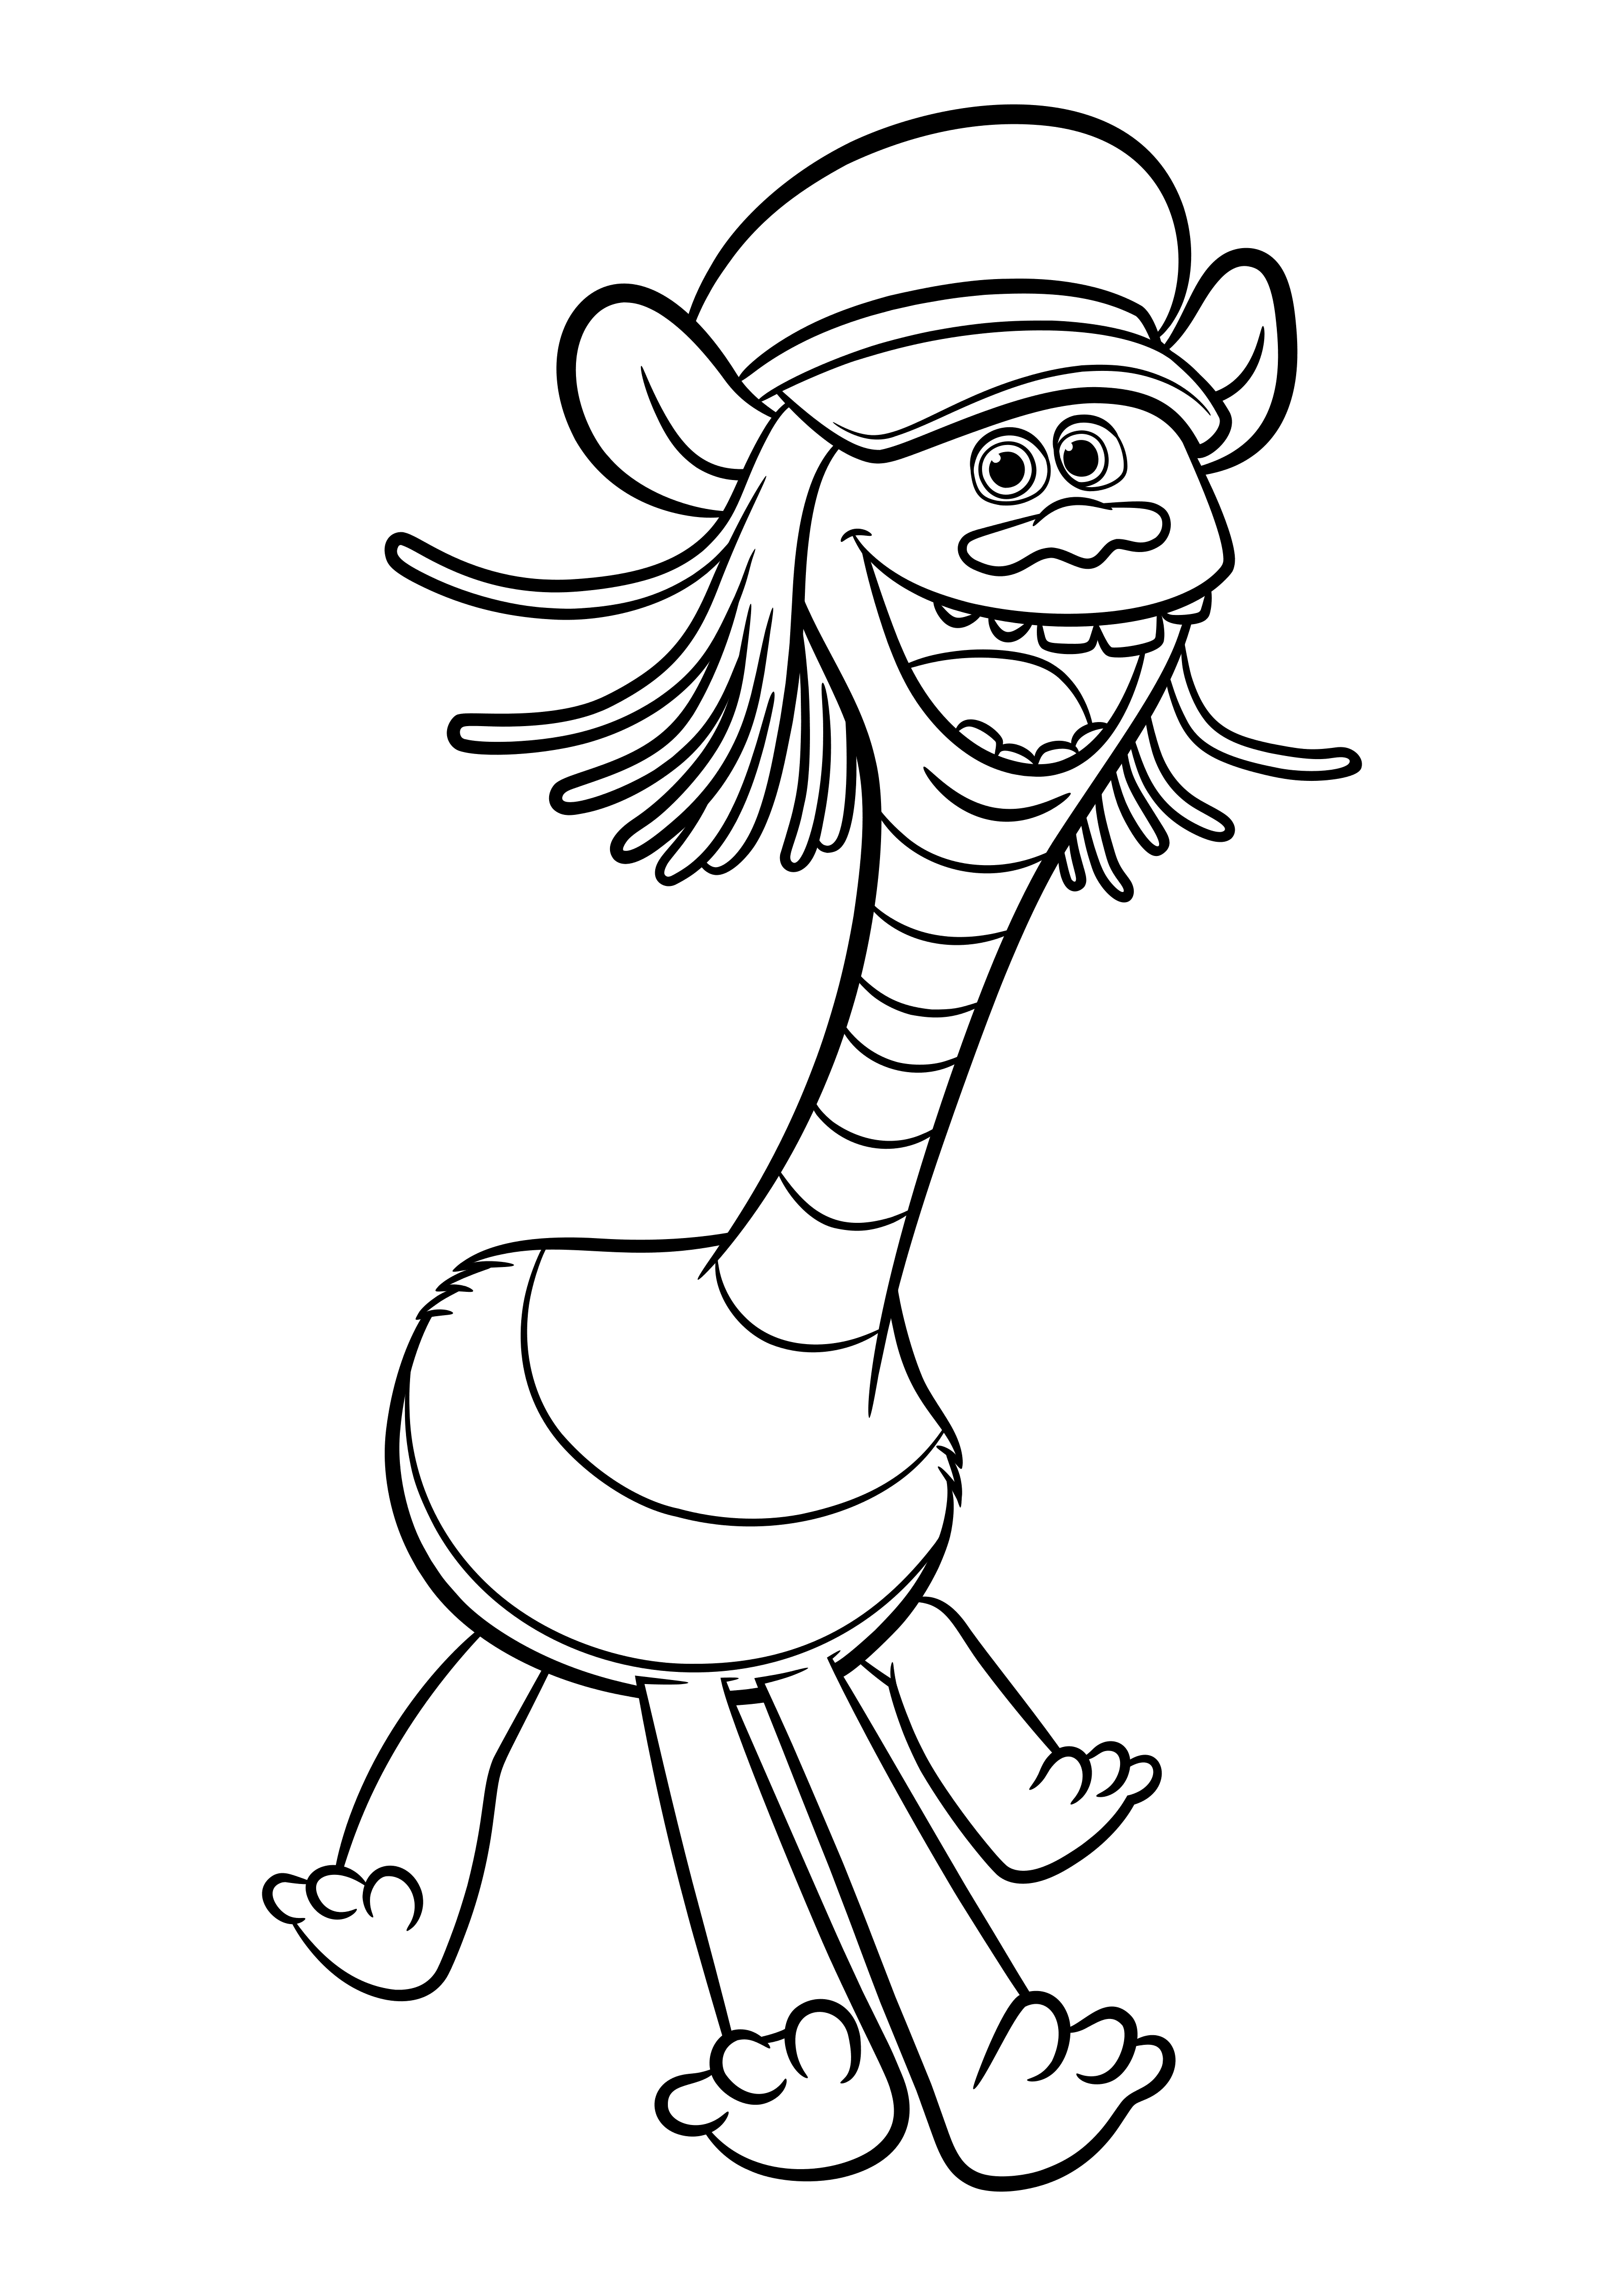 Free Coloring Book Image 2